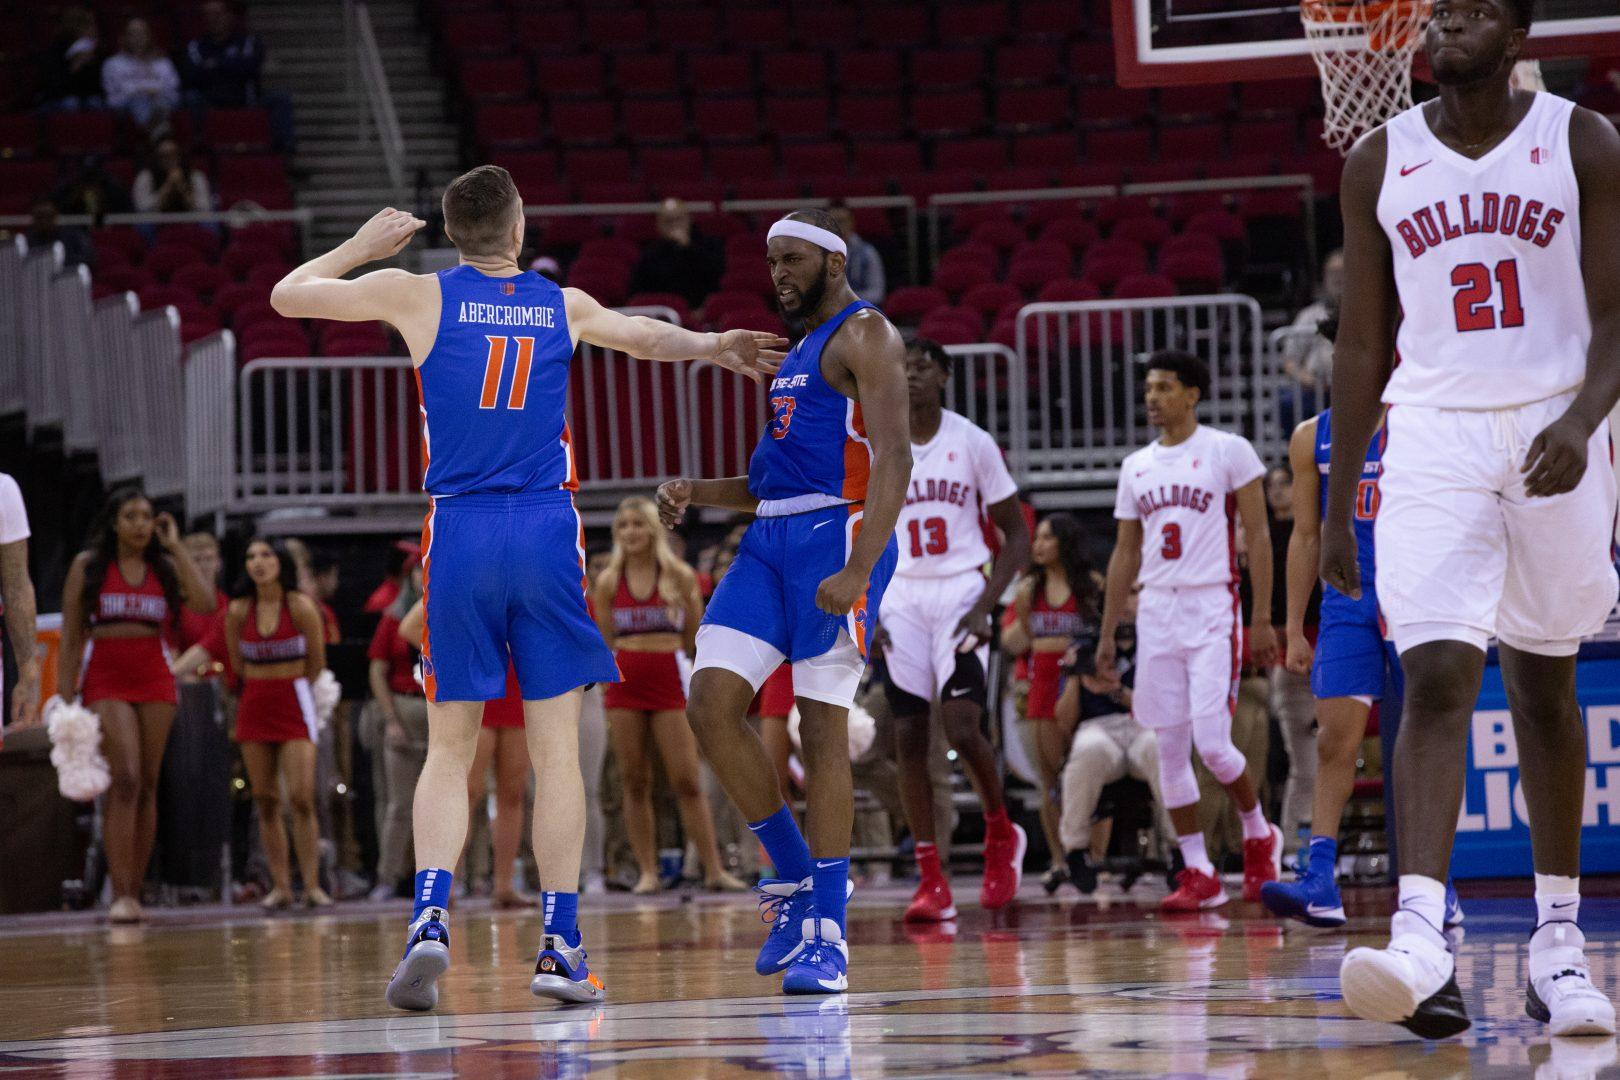 Boise’s RJ Williams (23) and teammate Riley Abercrombie (11) celebrate as Boise State adds to their double digit lead on Saturday Jan. 25 at the Save Mart Center. (Armando Carreno/The Collegian)
